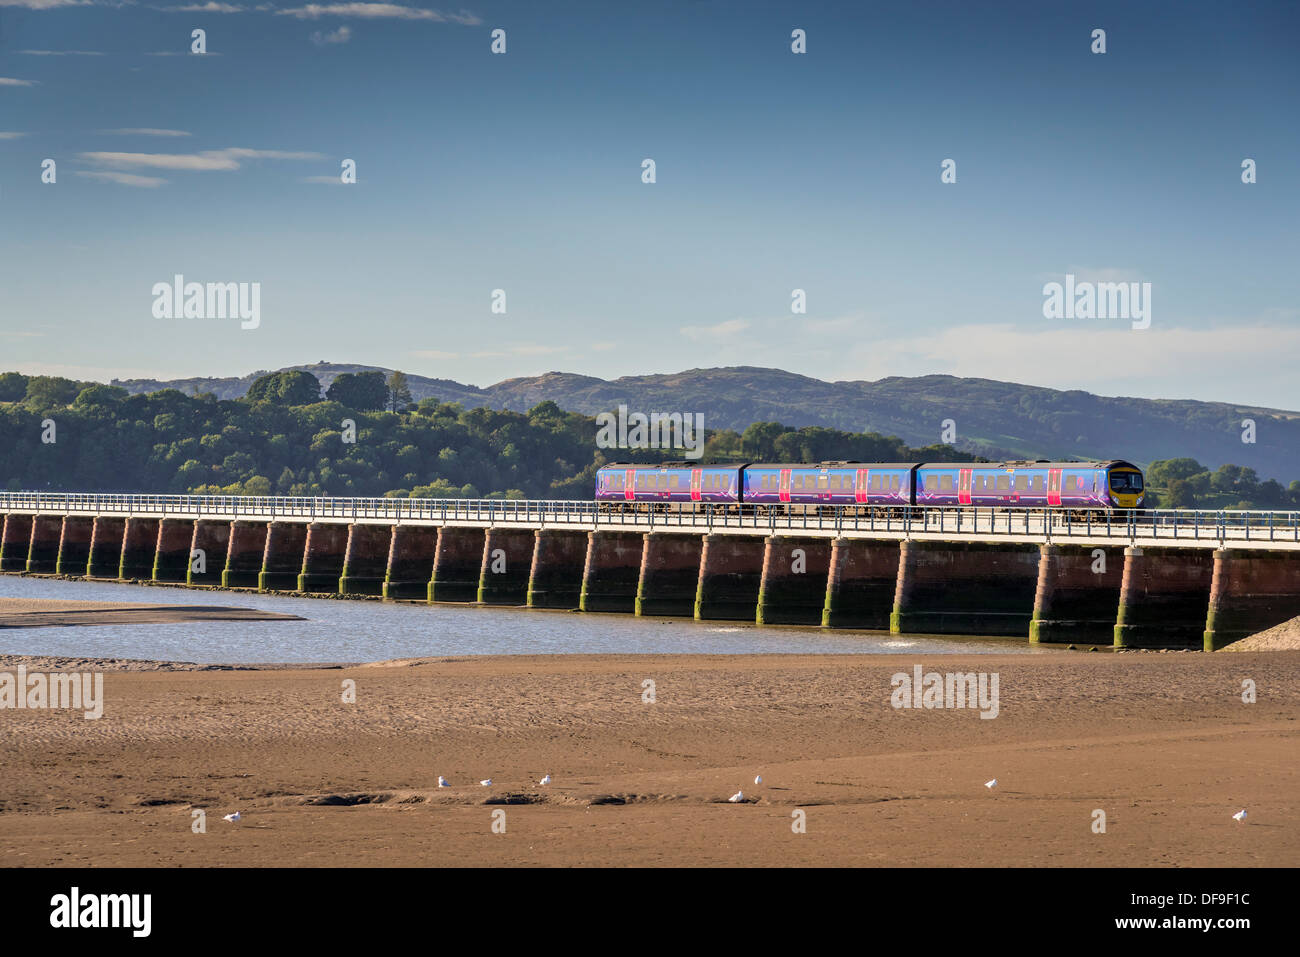 The_railway_viaduct_at_Arnside_over_the_